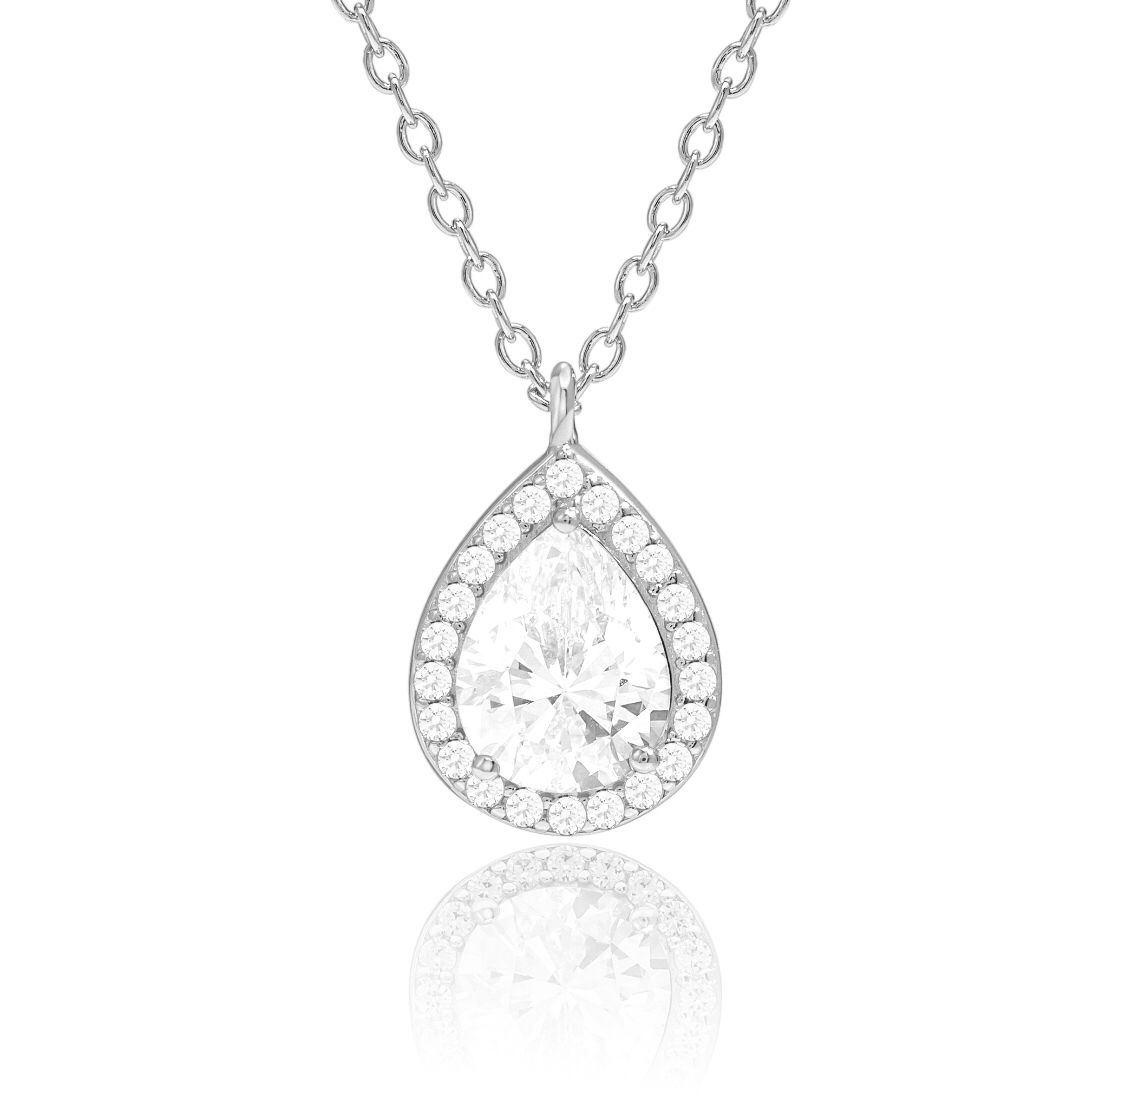 Teardrop white gold necklace